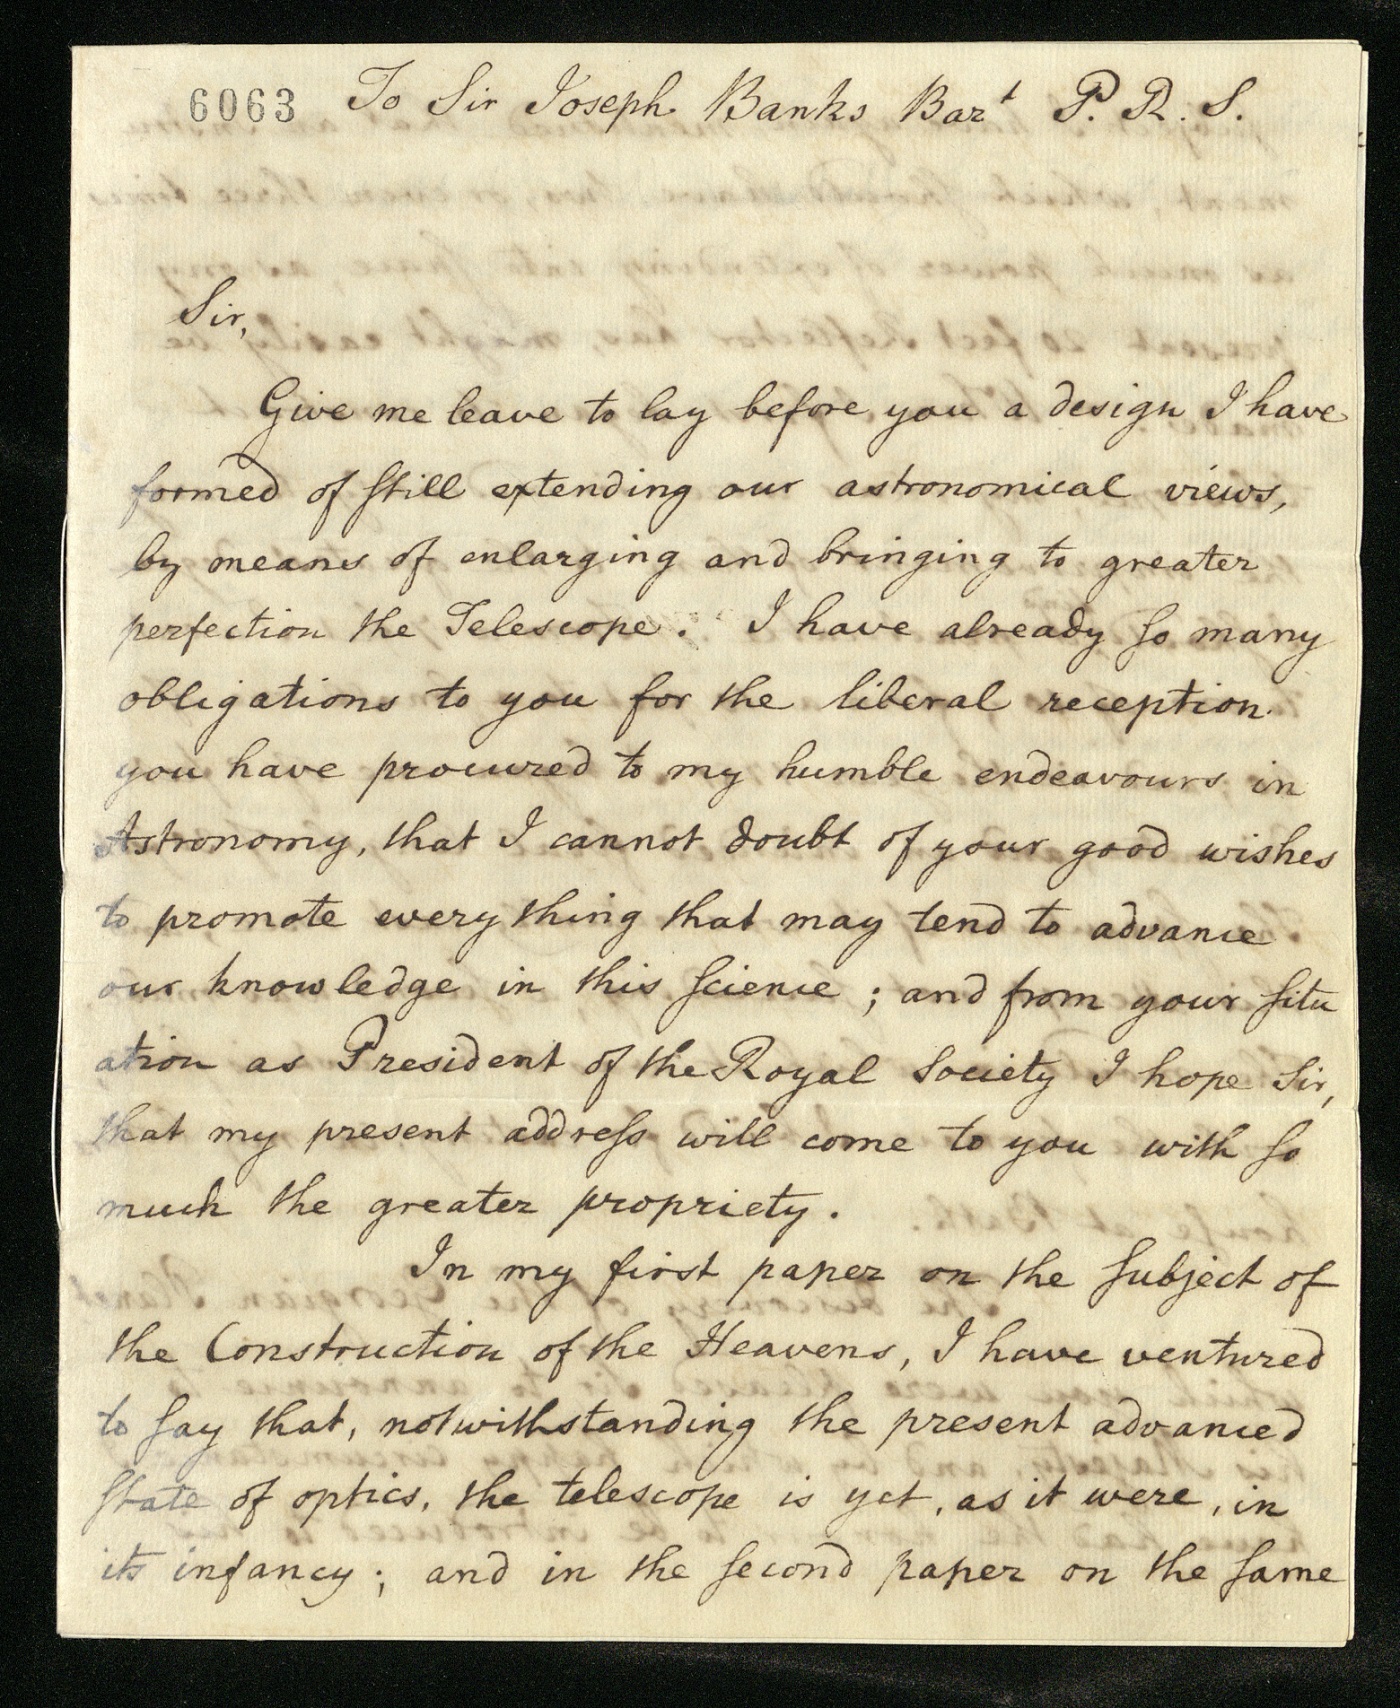 Letter from William Herschel to Sir Joseph Banks, with an estimate of the expenses required to build an enlarged telescope, page 1